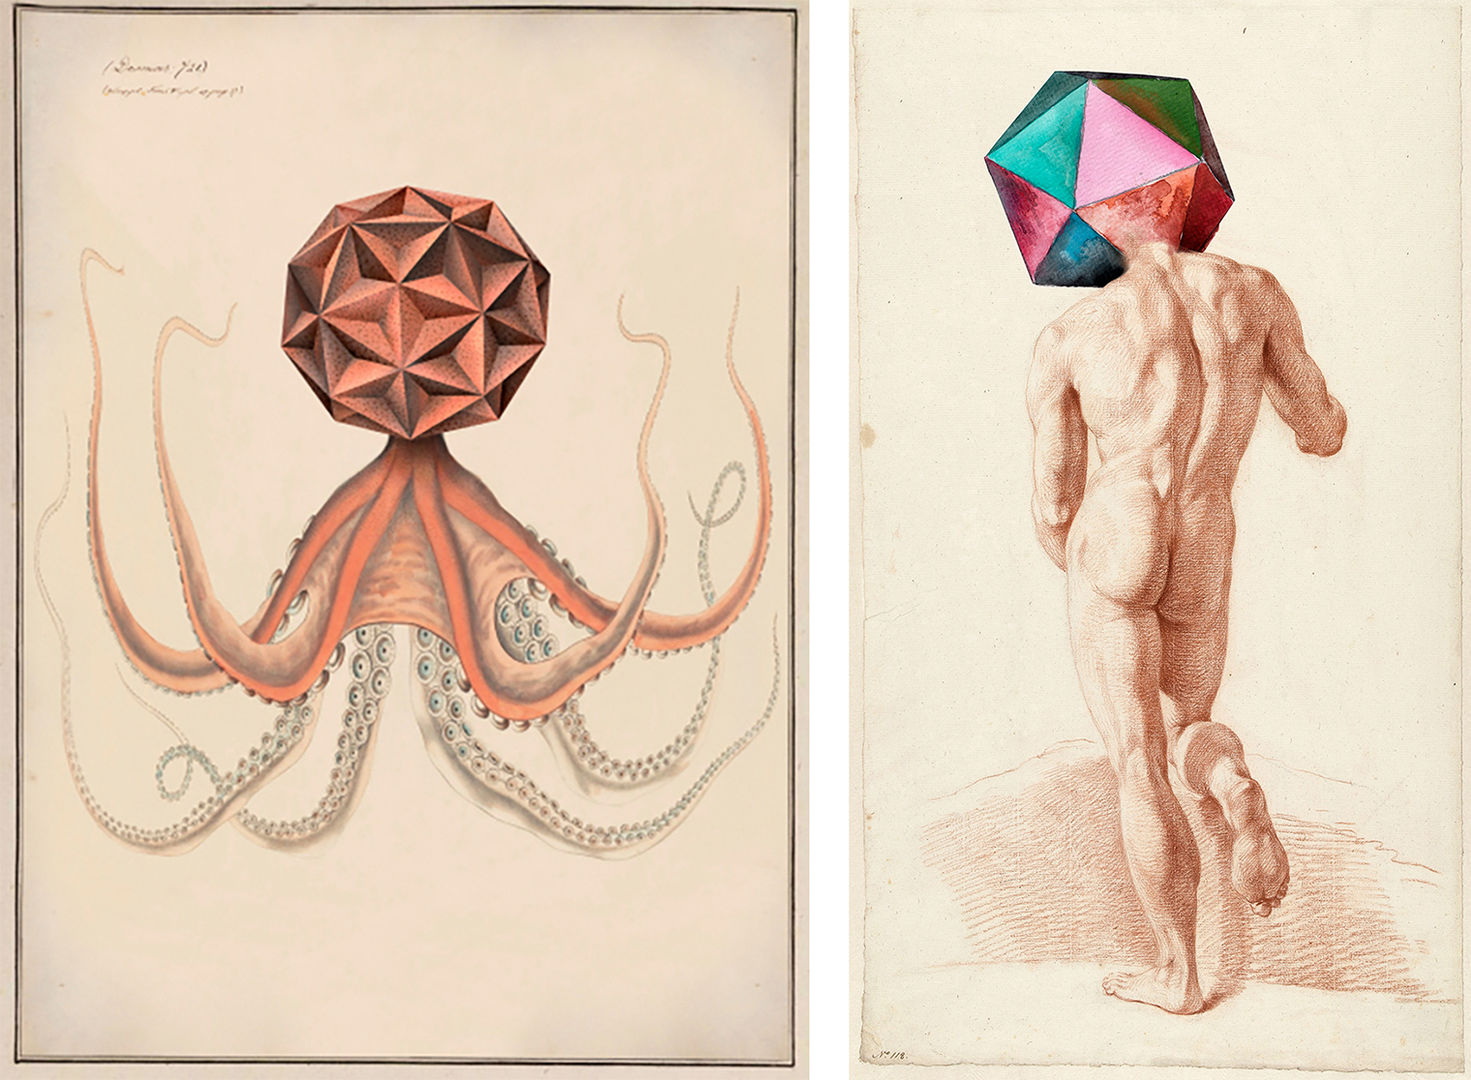 image on left is a sketch of an octopus with a geometric shape covering its head, image on right is a rear sketch of a nude man with a colorful geometric shape covering his head